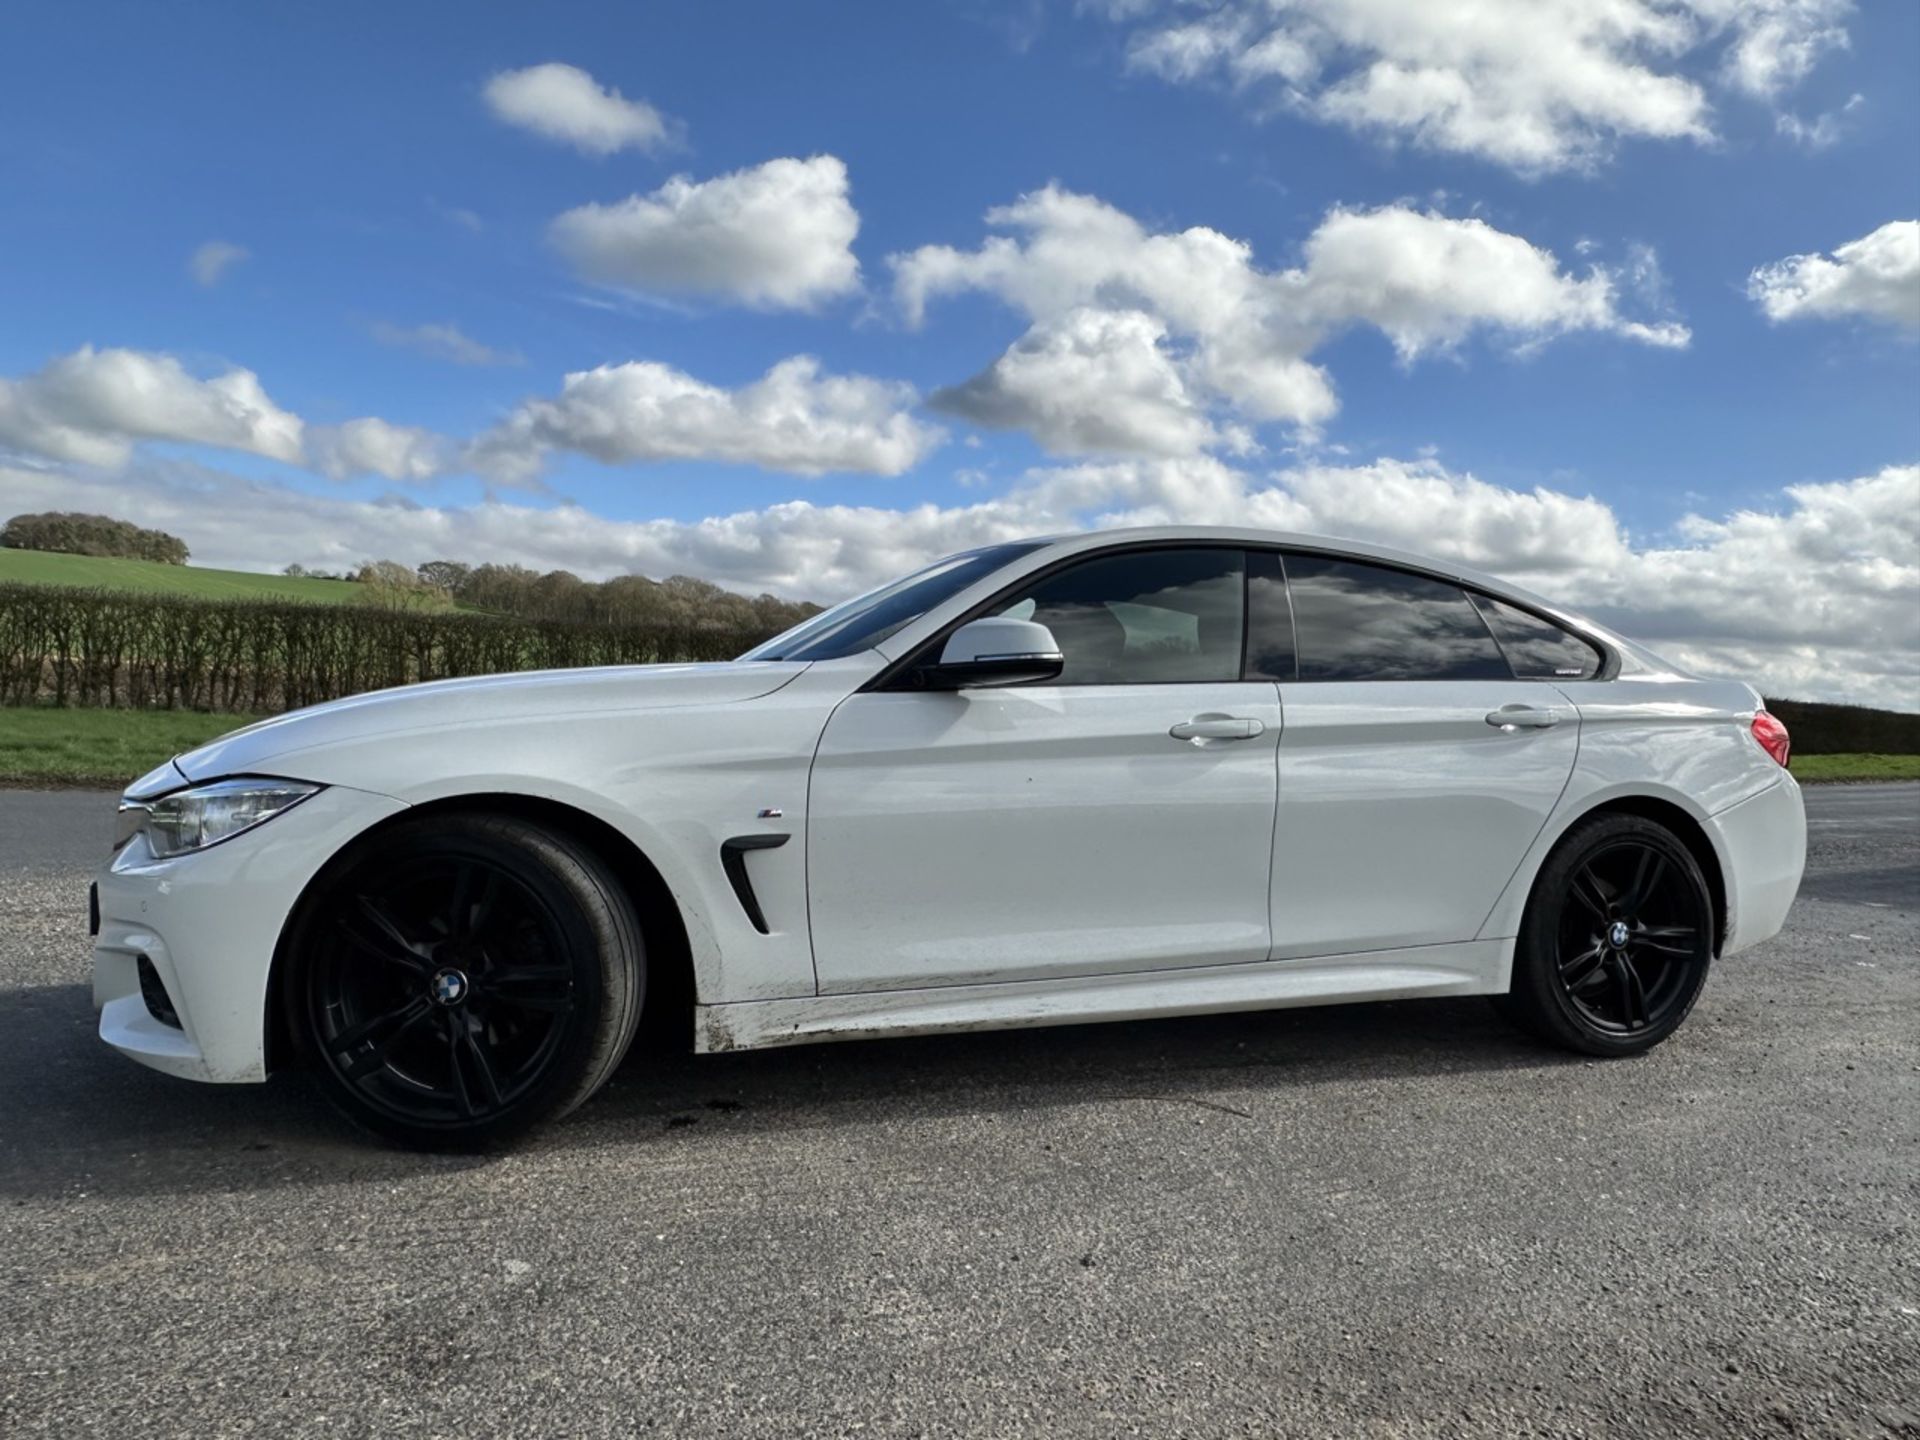 BMW 4 SERIES 420i M Sport 5dr [Professional Media] Manual - Petrol - 2.0 - Coupe- 54k miles - 2016 - Image 6 of 15